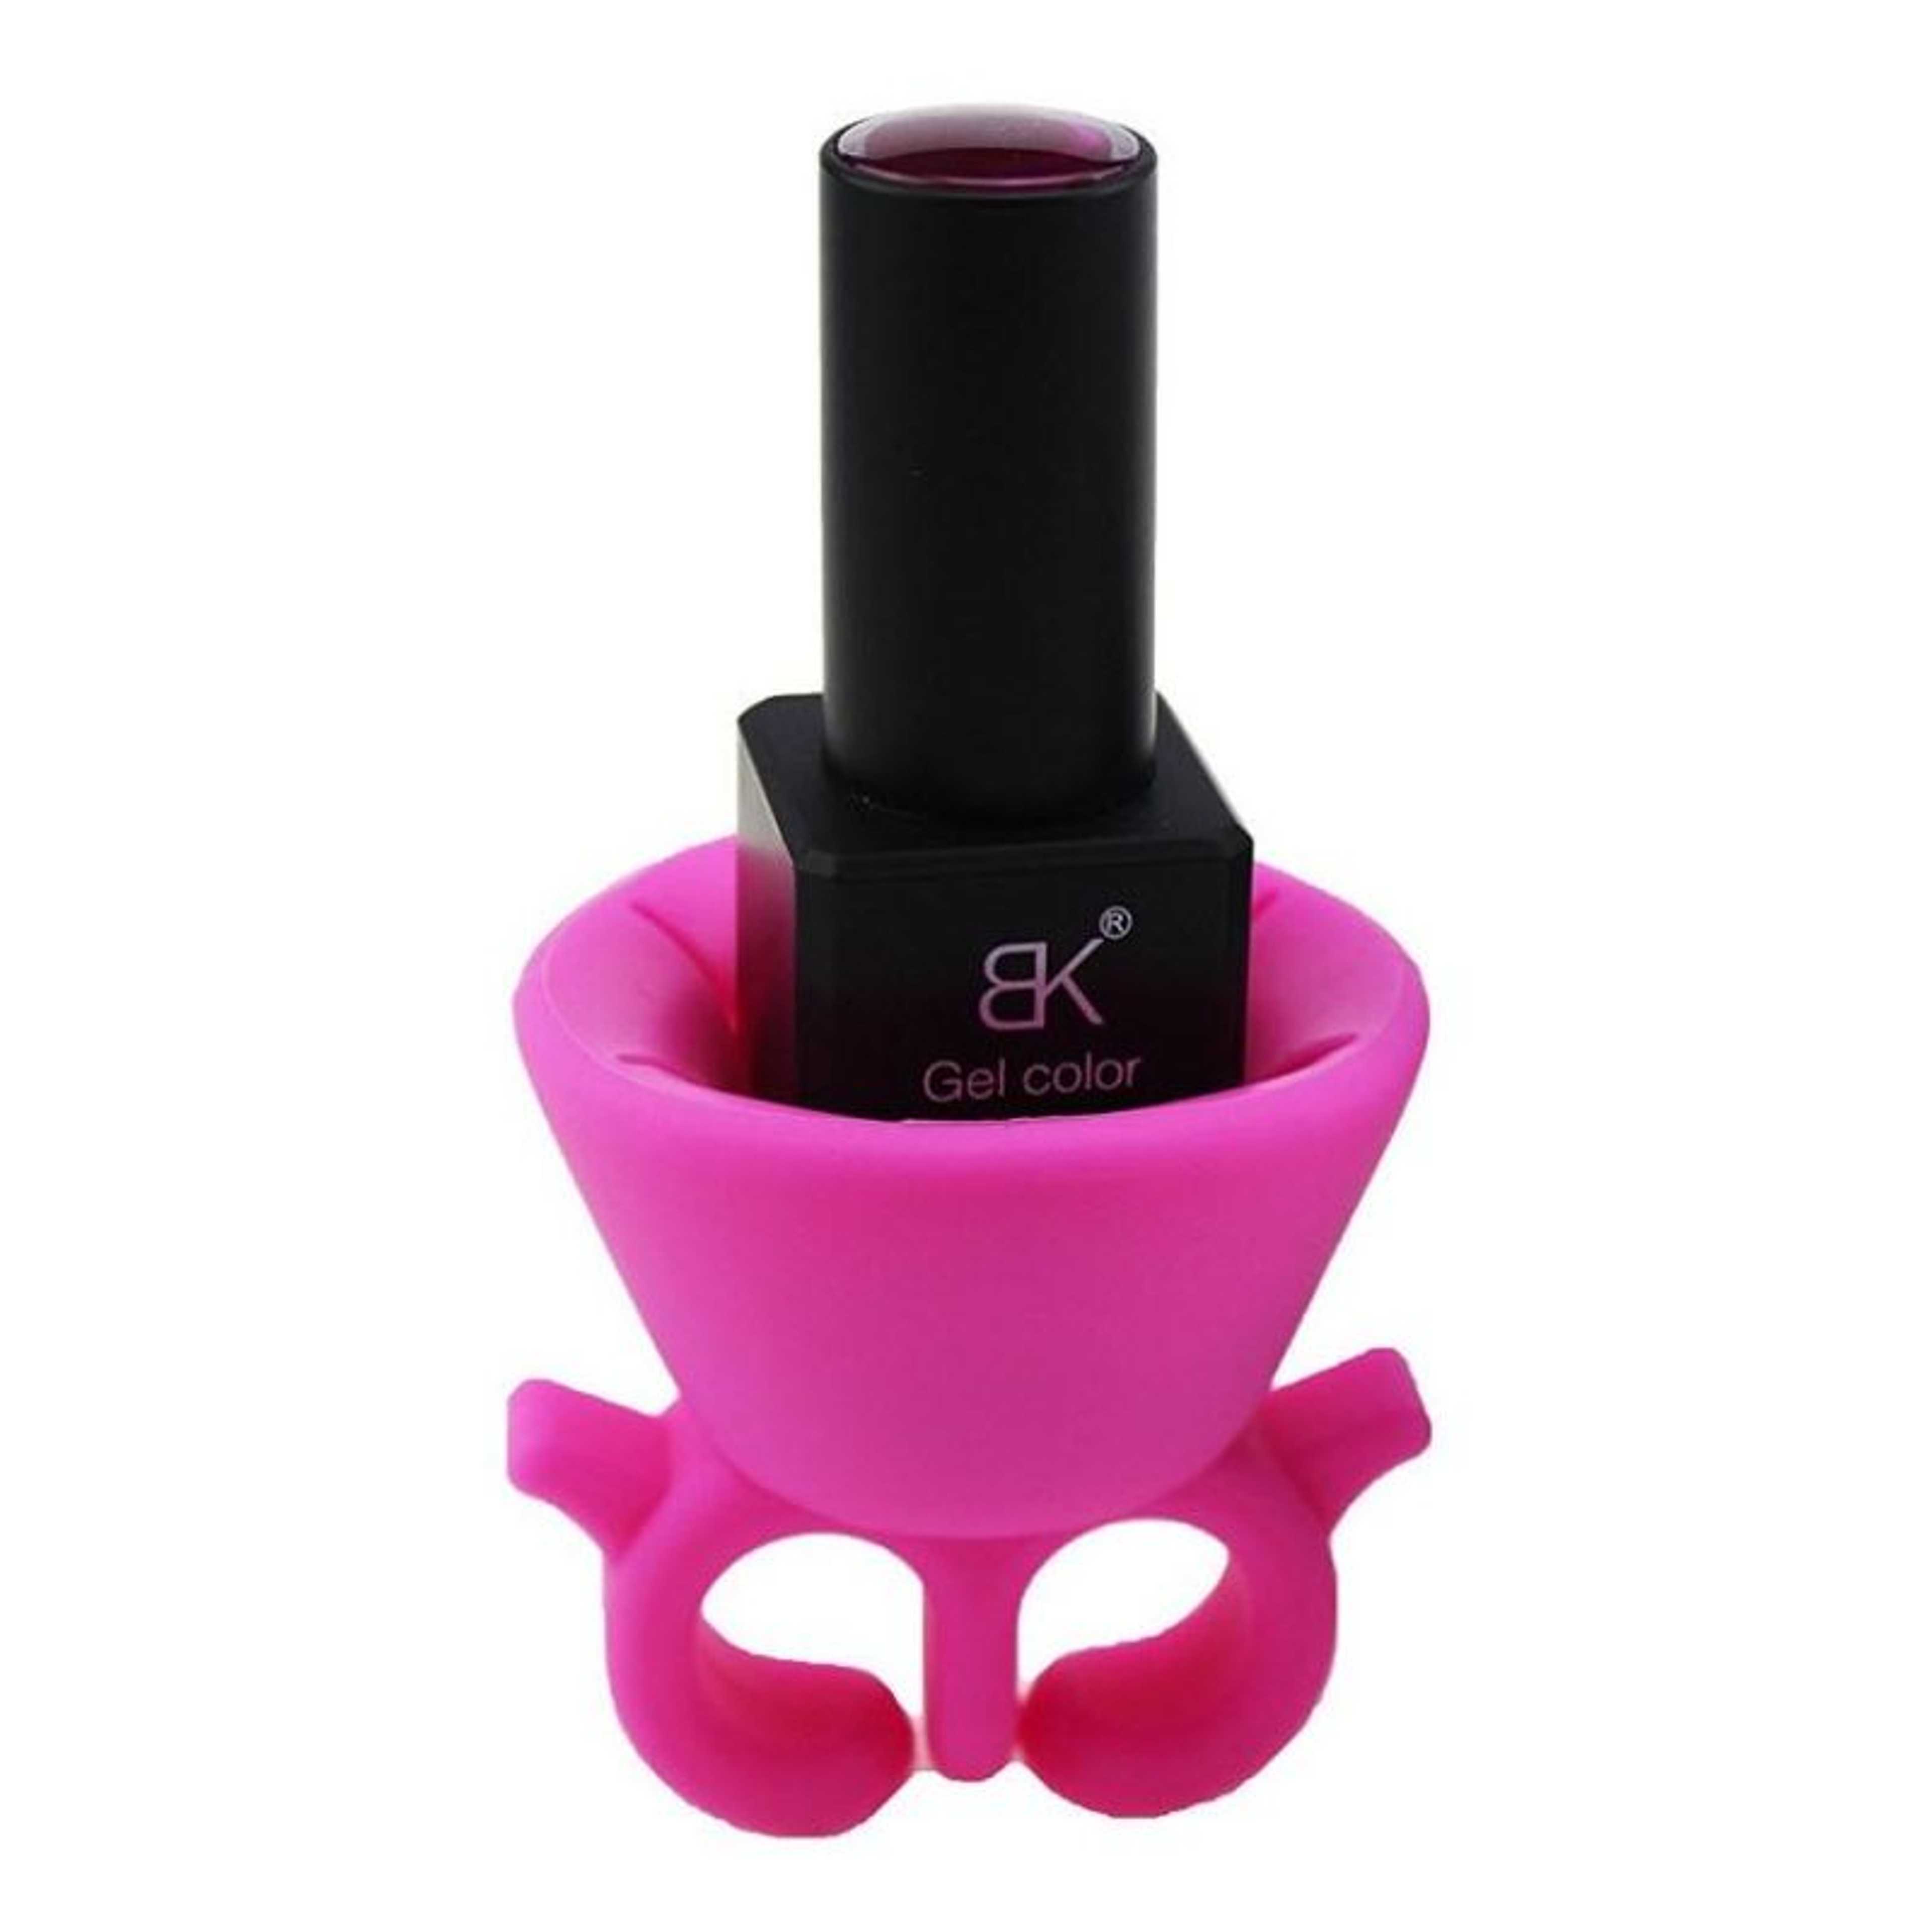 Wearable Soft Silicone Nail Polish Holder - Pink